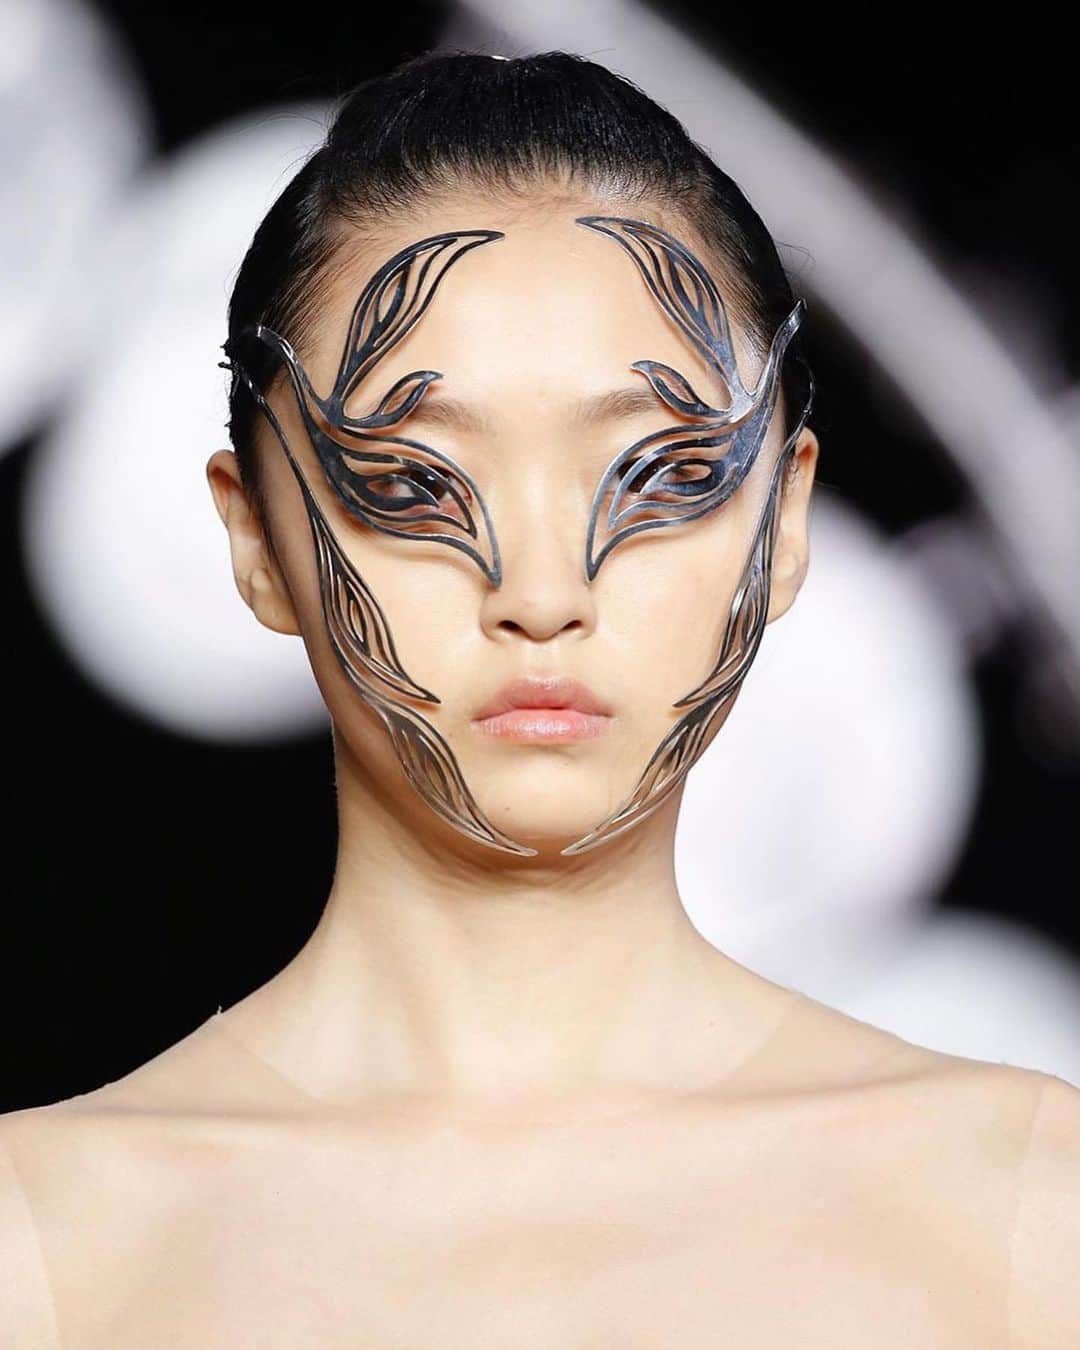 Iris Van Herpeさんのインスタグラム写真 - (Iris Van HerpeInstagram)「Zooming into the intricate details of the Iris Van Herpen face jewellery ~ reframing, dazing and extending beauty into new natures.  Look 1,2,3: ‘Hypnosis’ Collection 2019 Look 4,5,6: ‘Syntopia’ Collection 2018 Look 7: ‘Shift Souls’ Collection 2019 Collaborating artist: @philip.beesley Look 8: ‘Syntopia’ Collection 2018 Look 9: ‘Sensory Seas’ Collection 2020 Look 10: ‘Crystallization’ Collection 2010 Collaborating artist: @irenebussemaker  Video by @blitzkickers Photography by @giostaiano | @karlcollins1 | @mollysjlowe | @bryanhuynh | @schohaja | @michelzoeter Styling: @patti_wilson Casting: Maida Gregori Boina | @maximevalentini | @caromauger Models: @xvjing1213 | @kayleighvanheerde | @shujing_sugarless | @chunjie_liu | @___poliana___ | @yilan_hua Music direction: @sssalvadorrr Breed Including tracks: David Hykes - Rainbow Voice (Radio France) @GamelanVoices - Mentawai (Gong Ear) @Kuedo_ - Border State Collapse @DJMartinRoth - An Analog Guy in a Digital World Make-up: @silbruinsma1 | @maccosmeticsfrance PRO Team | @terrybarberonbeauty | @chiaolihsu | @macpro | @lydialeloux Hair: @martincullen65 | @streetersldn | @bjornaxen | Rutger van der Heide Manicure: @jessicascholten_ | @opinl Shoes: @trippen.official | @unitednude Press: @karlaotto  #irisvanherpen #couture #archive」5月25日 21時04分 - irisvanherpen